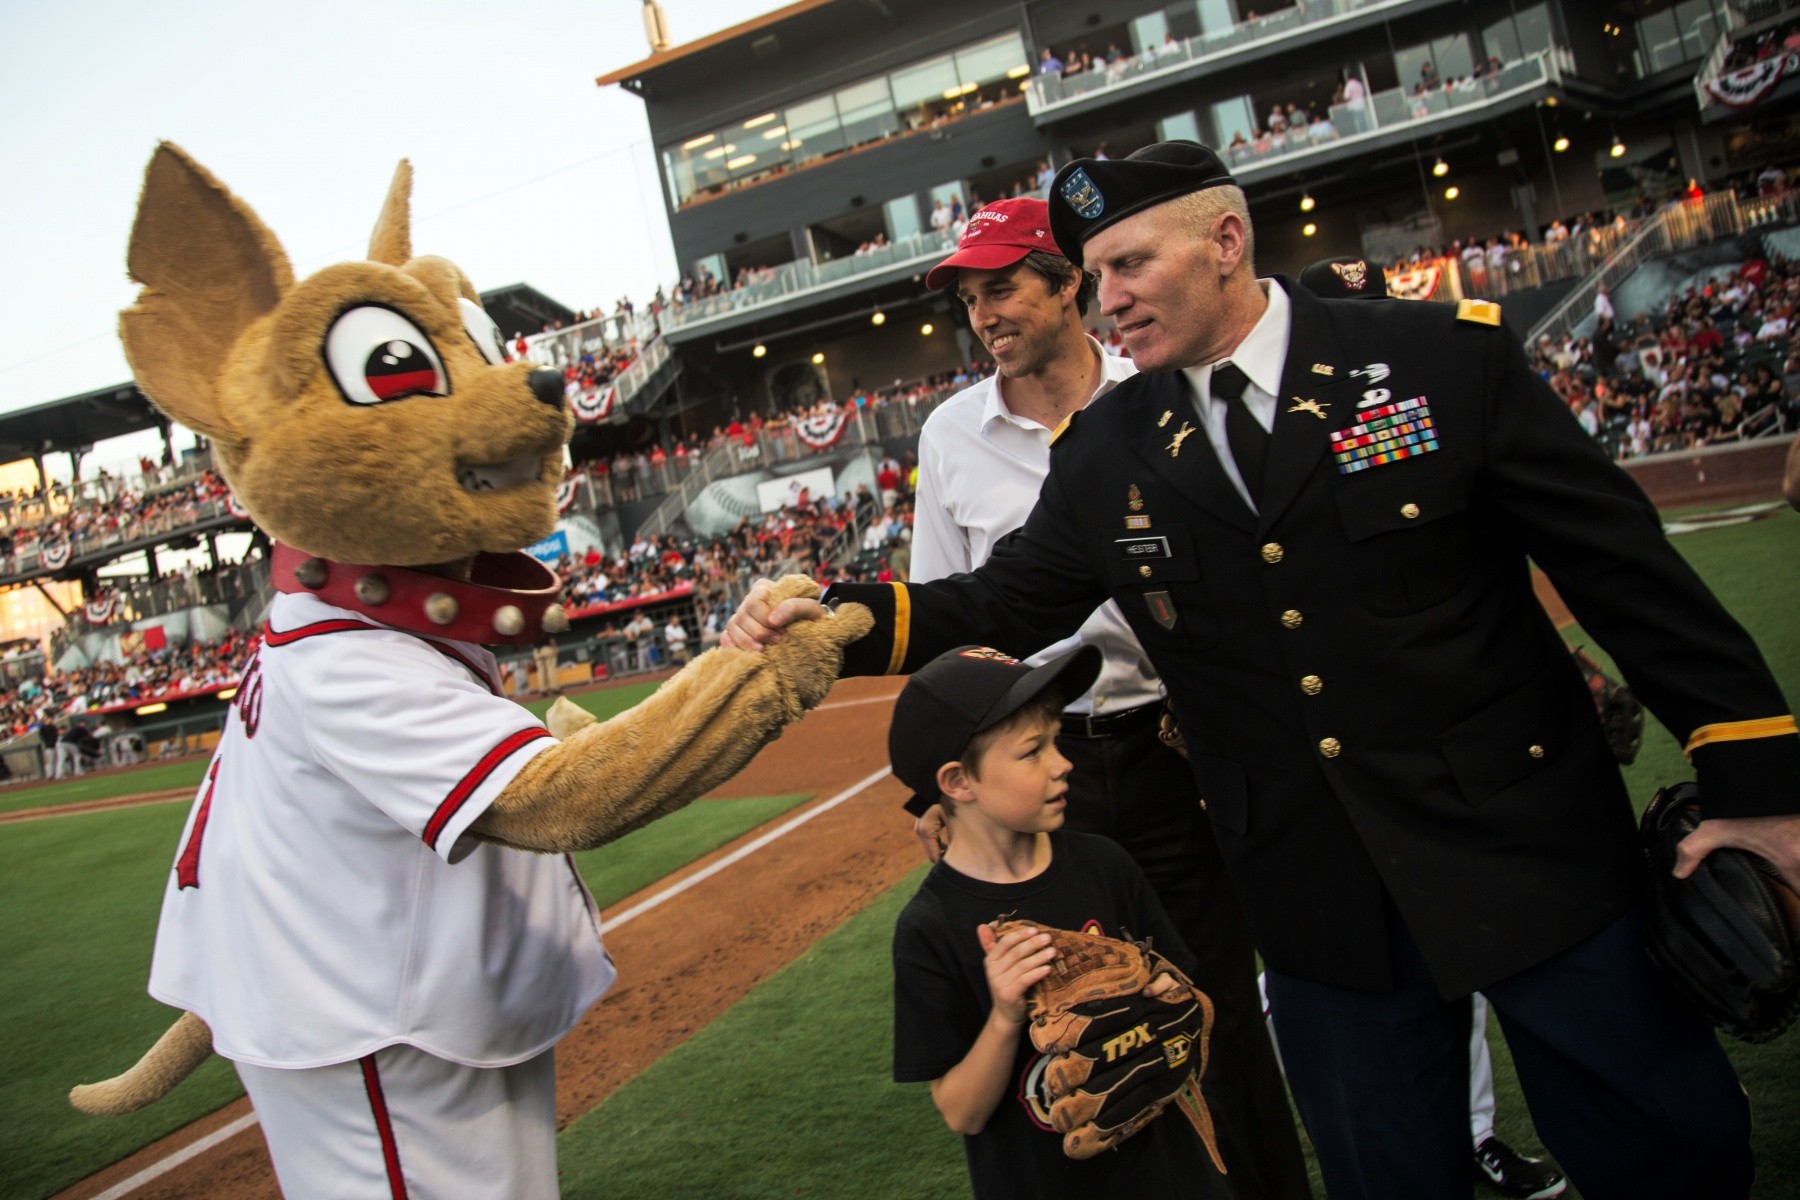 El Paso Chihuahuas opening night Article The United States Army